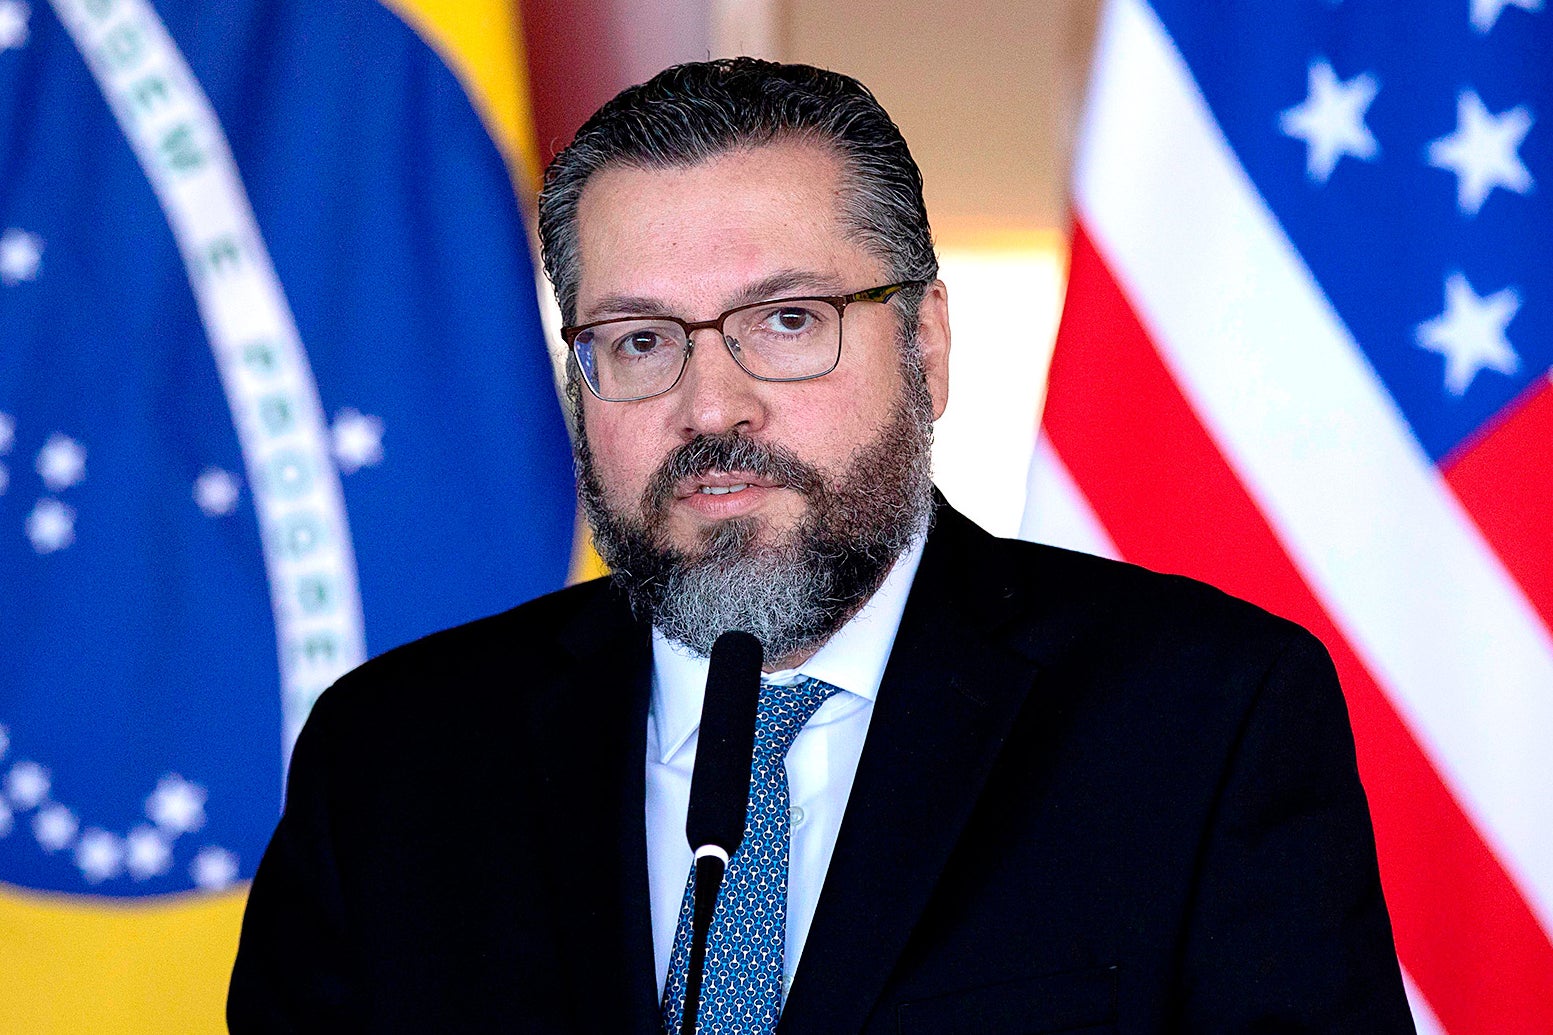 Brazil Foreign Minister Ernesto Araújo is pictured during a joint press conference at Itamaraty Palace.